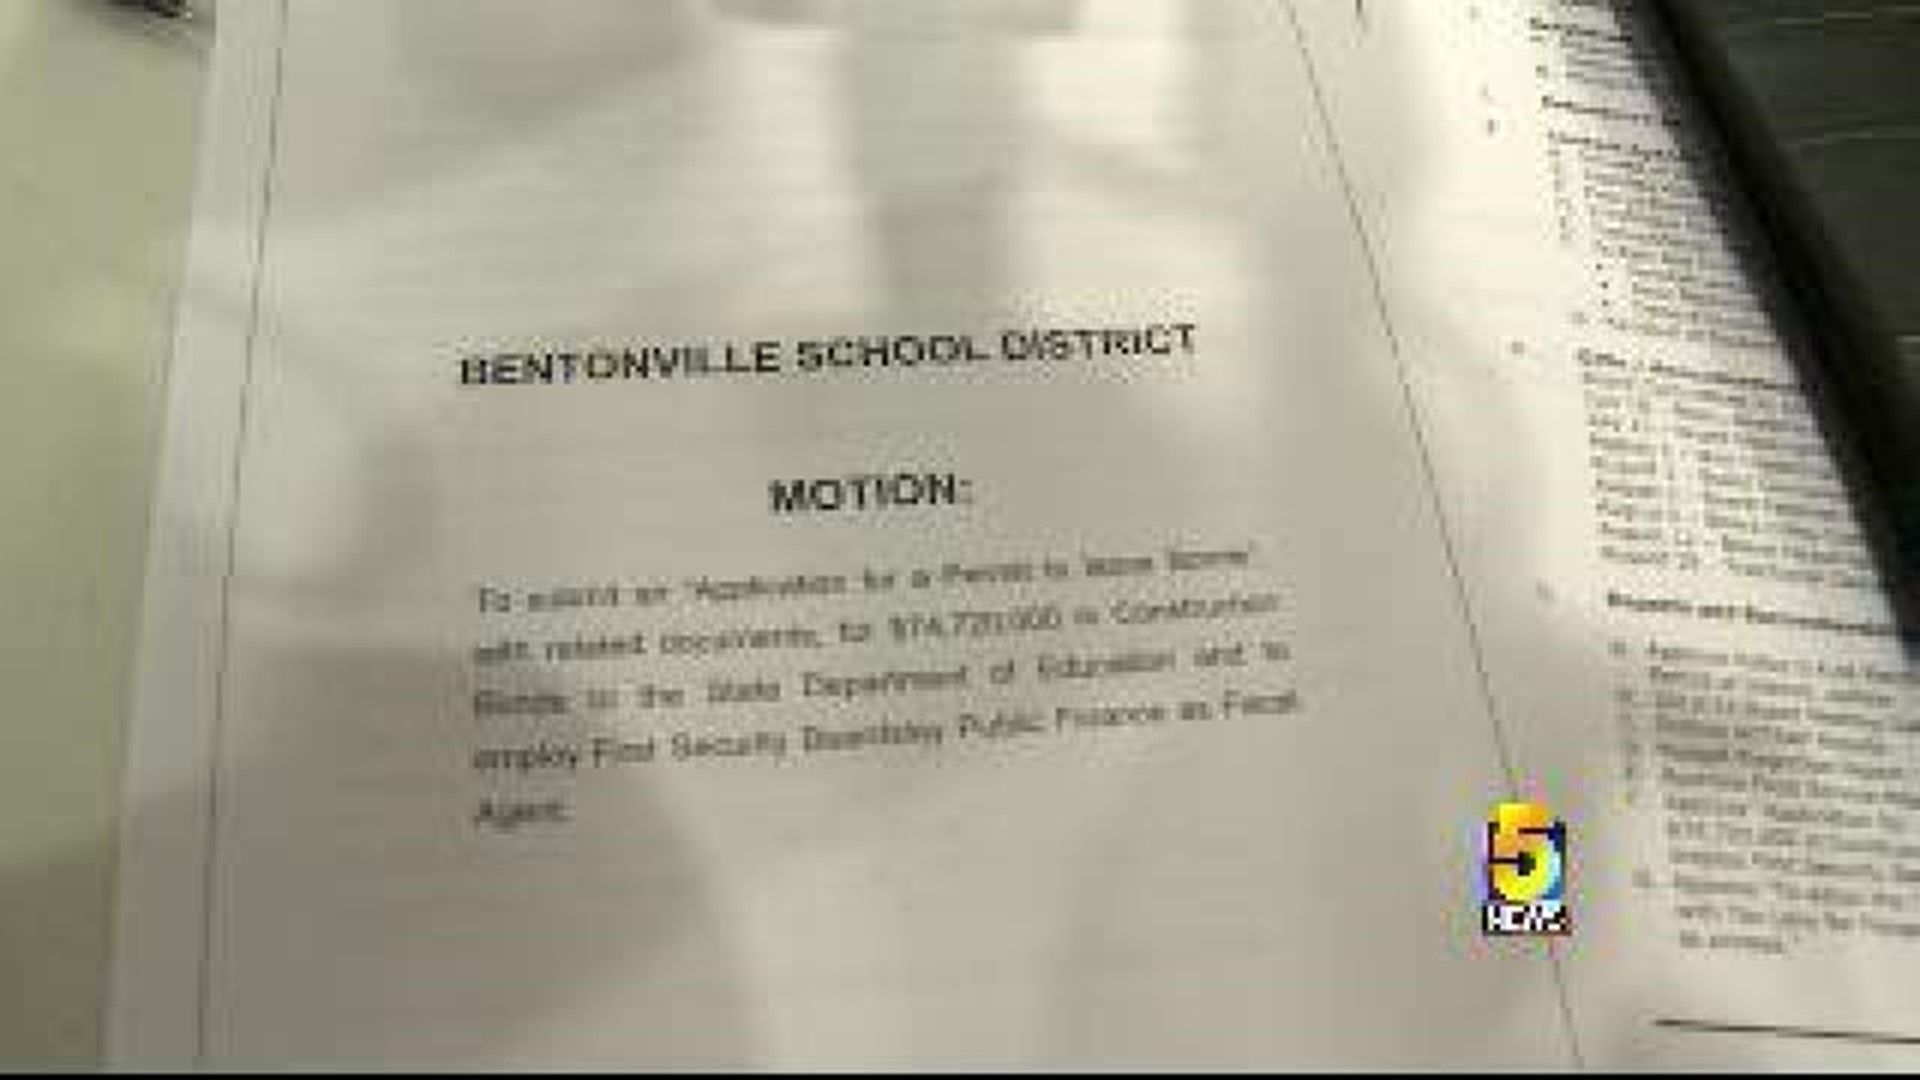 Bentonville Approves $74M For High School; 4 Schools Placed On Probation